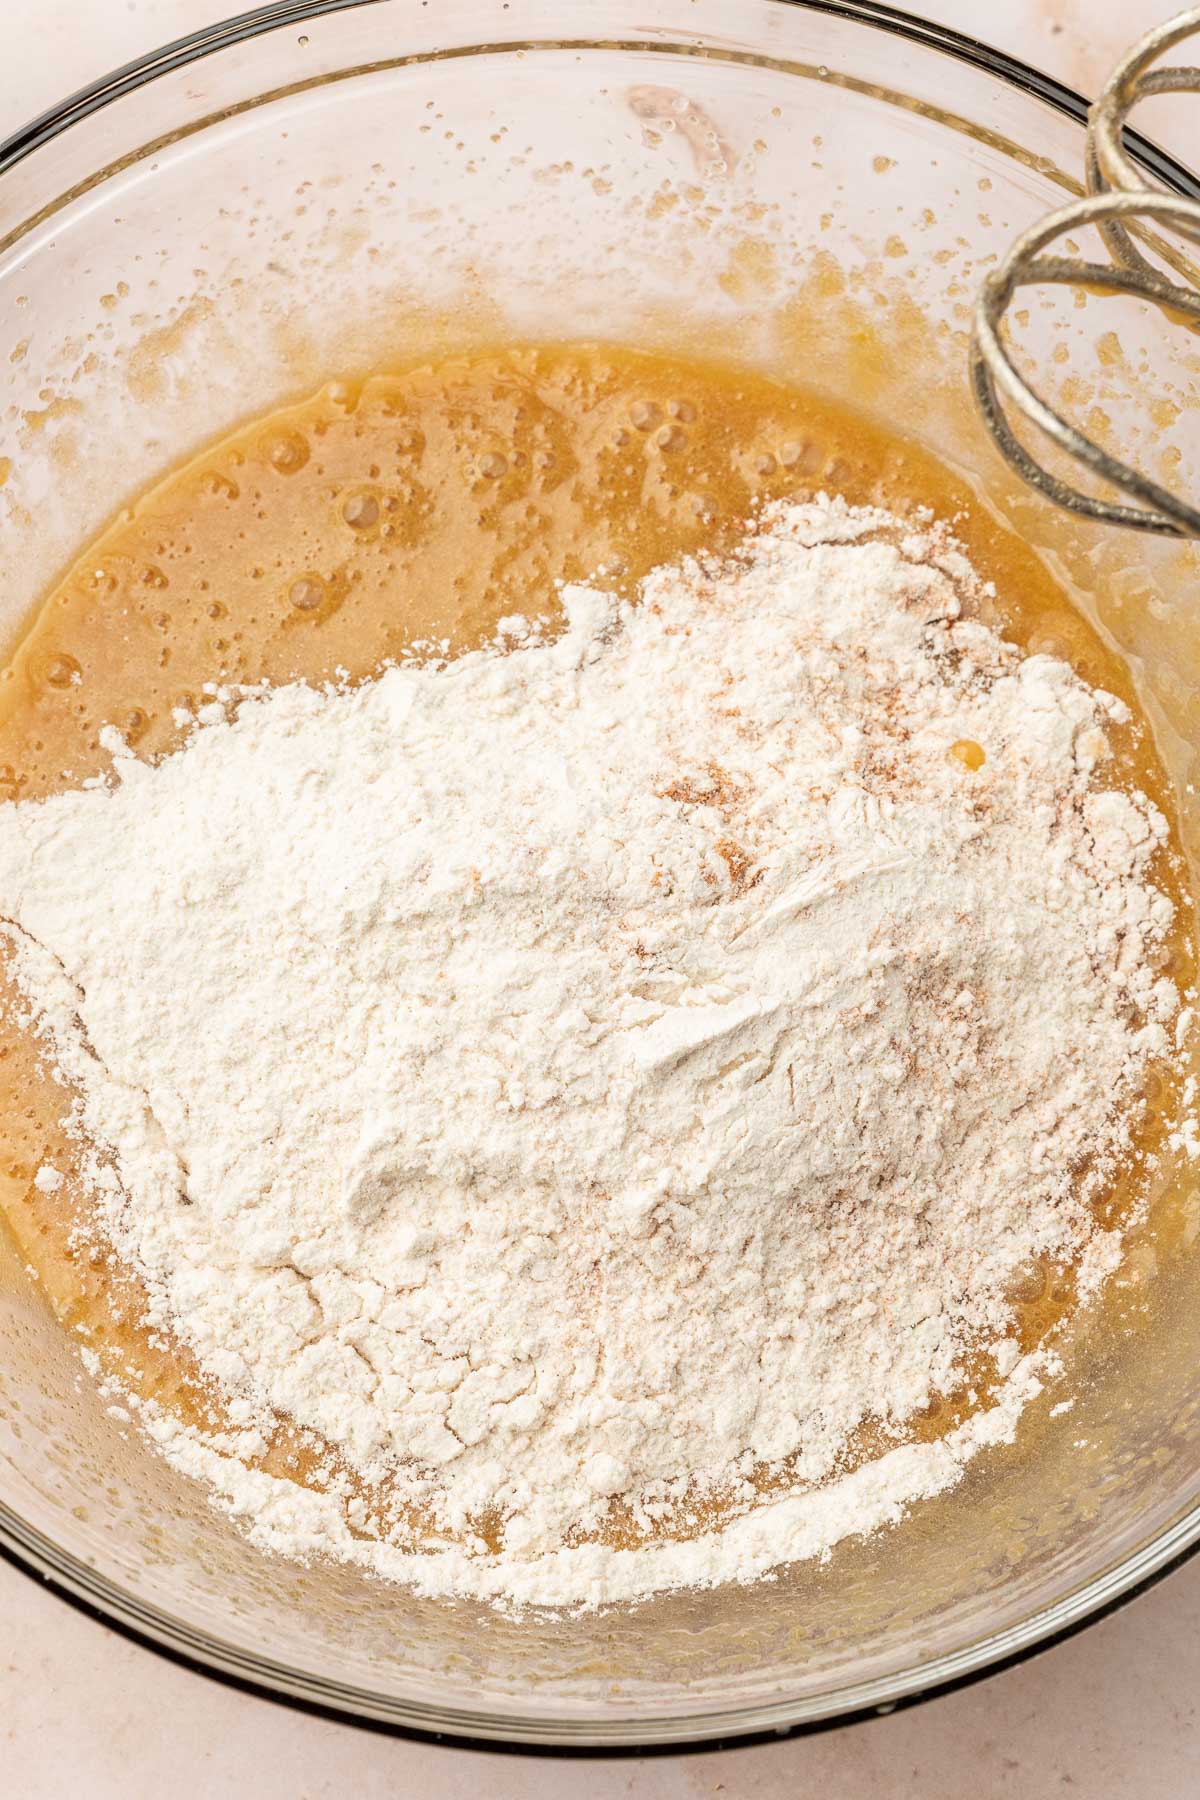 A glass mixing bowl with gluten-free cookie dough topped with gluten-free flour before mixing together.